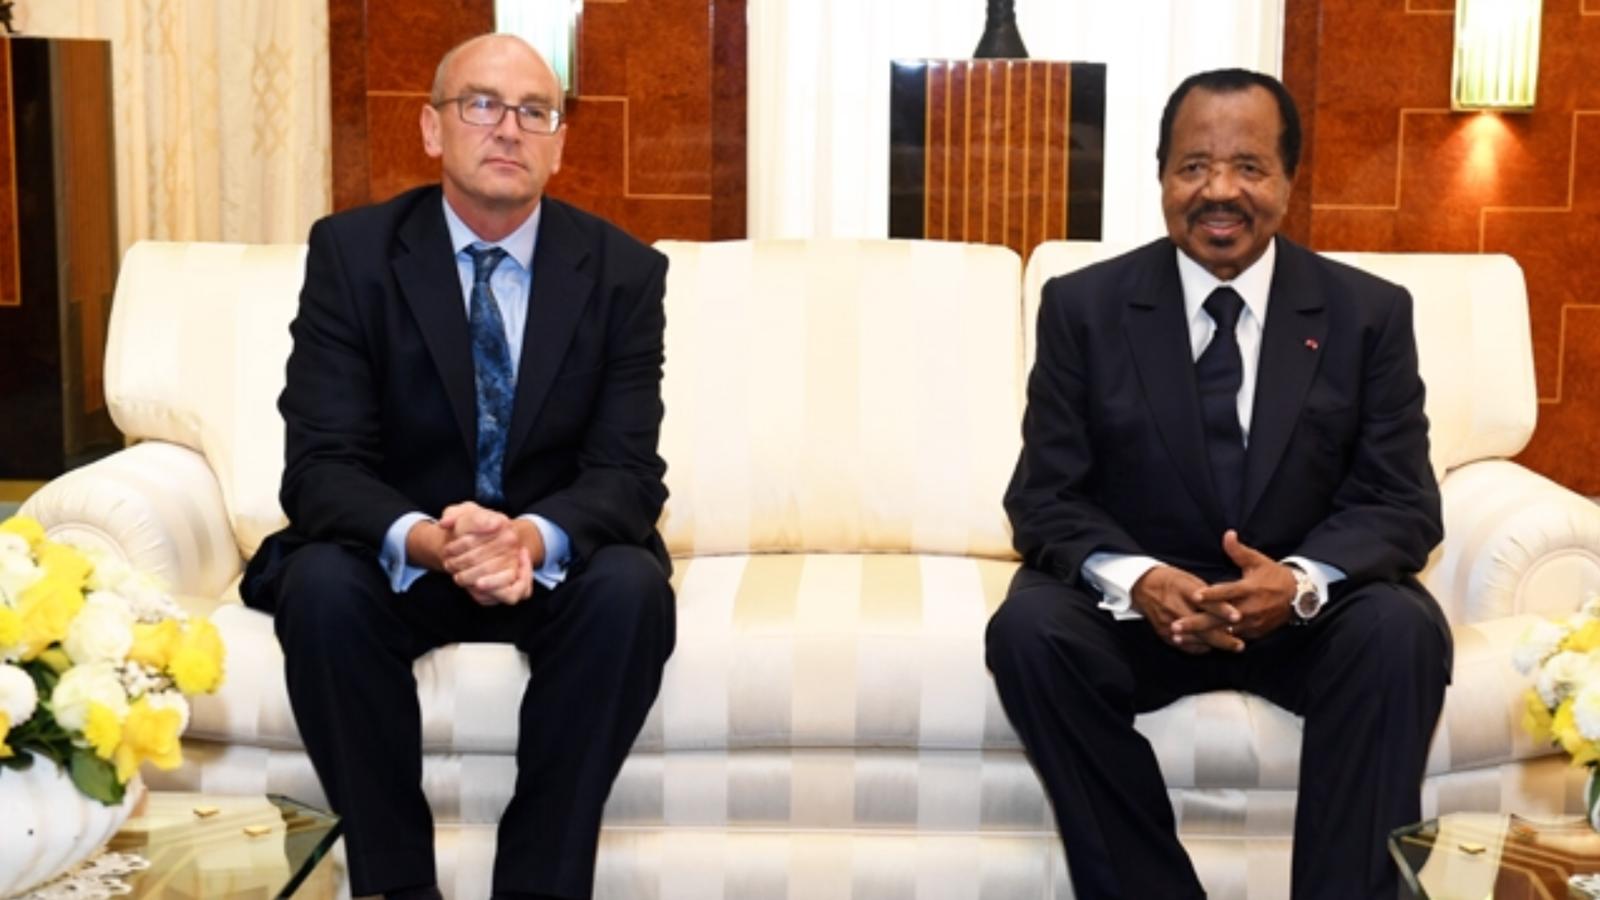 British High Commissioner to Cameroon - With HE President Paul Biya